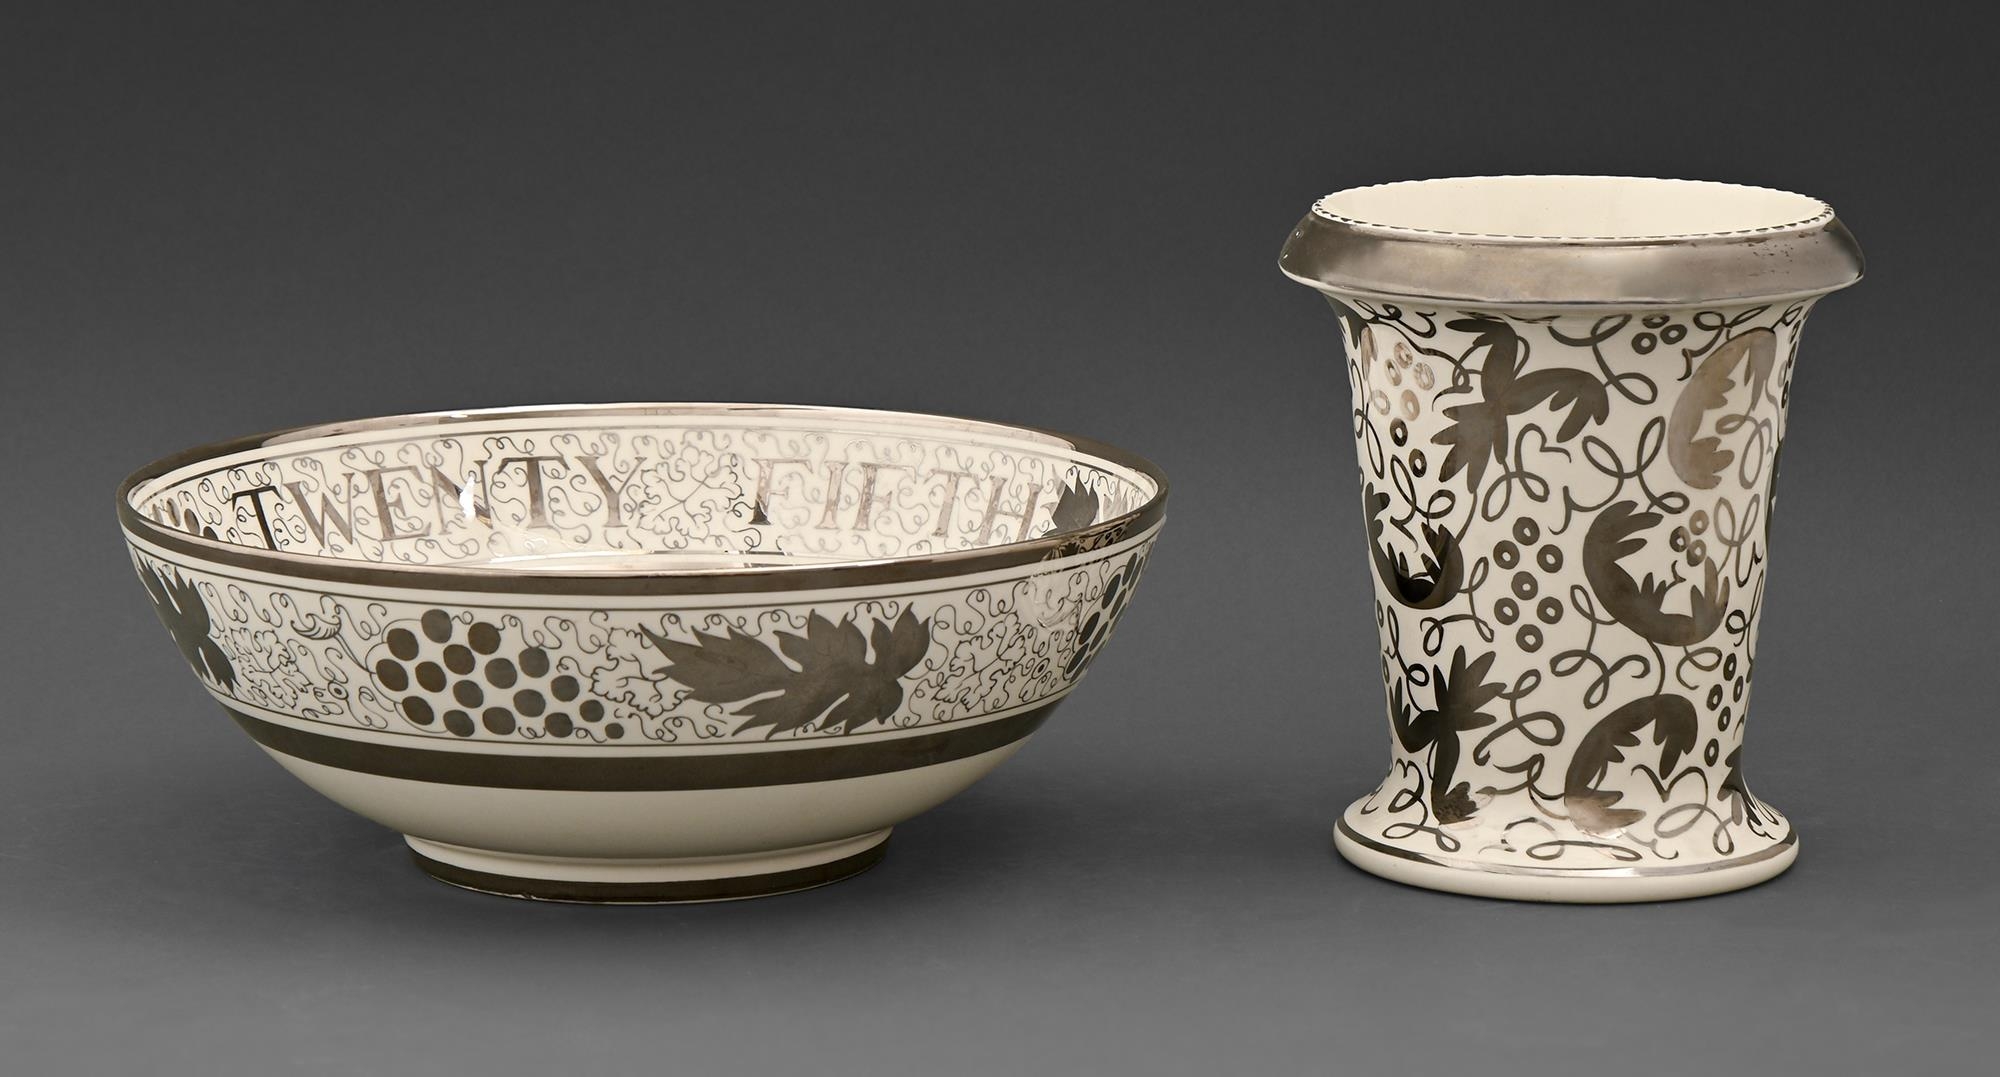 A Gray's Pottery silver lustre bowl, 26cm diam and a Wedgwood silver lustre vase, 16.5cm h (2)